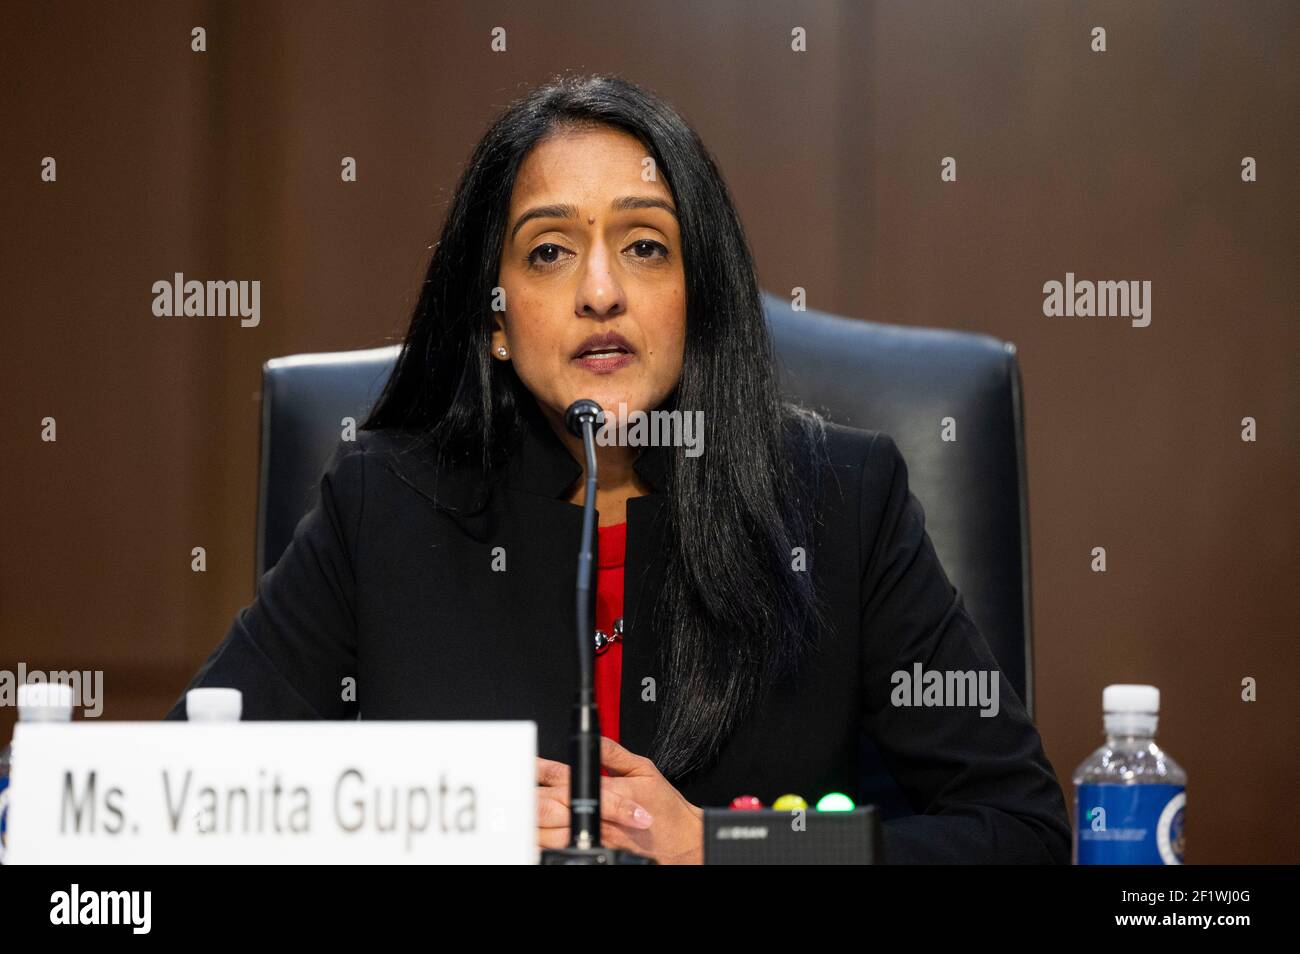 Washington, DC, USA. 9th Mar, 2021. March 9, 2021 - Washington, DC, United States: VANITA GUPTA, nominee to be Associate Attorney General of the Department of Justice, speaking at a hearing of the Senate judiciary Committee. Credit: Michael Brochstein/ZUMA Wire/Alamy Live News Stock Photo